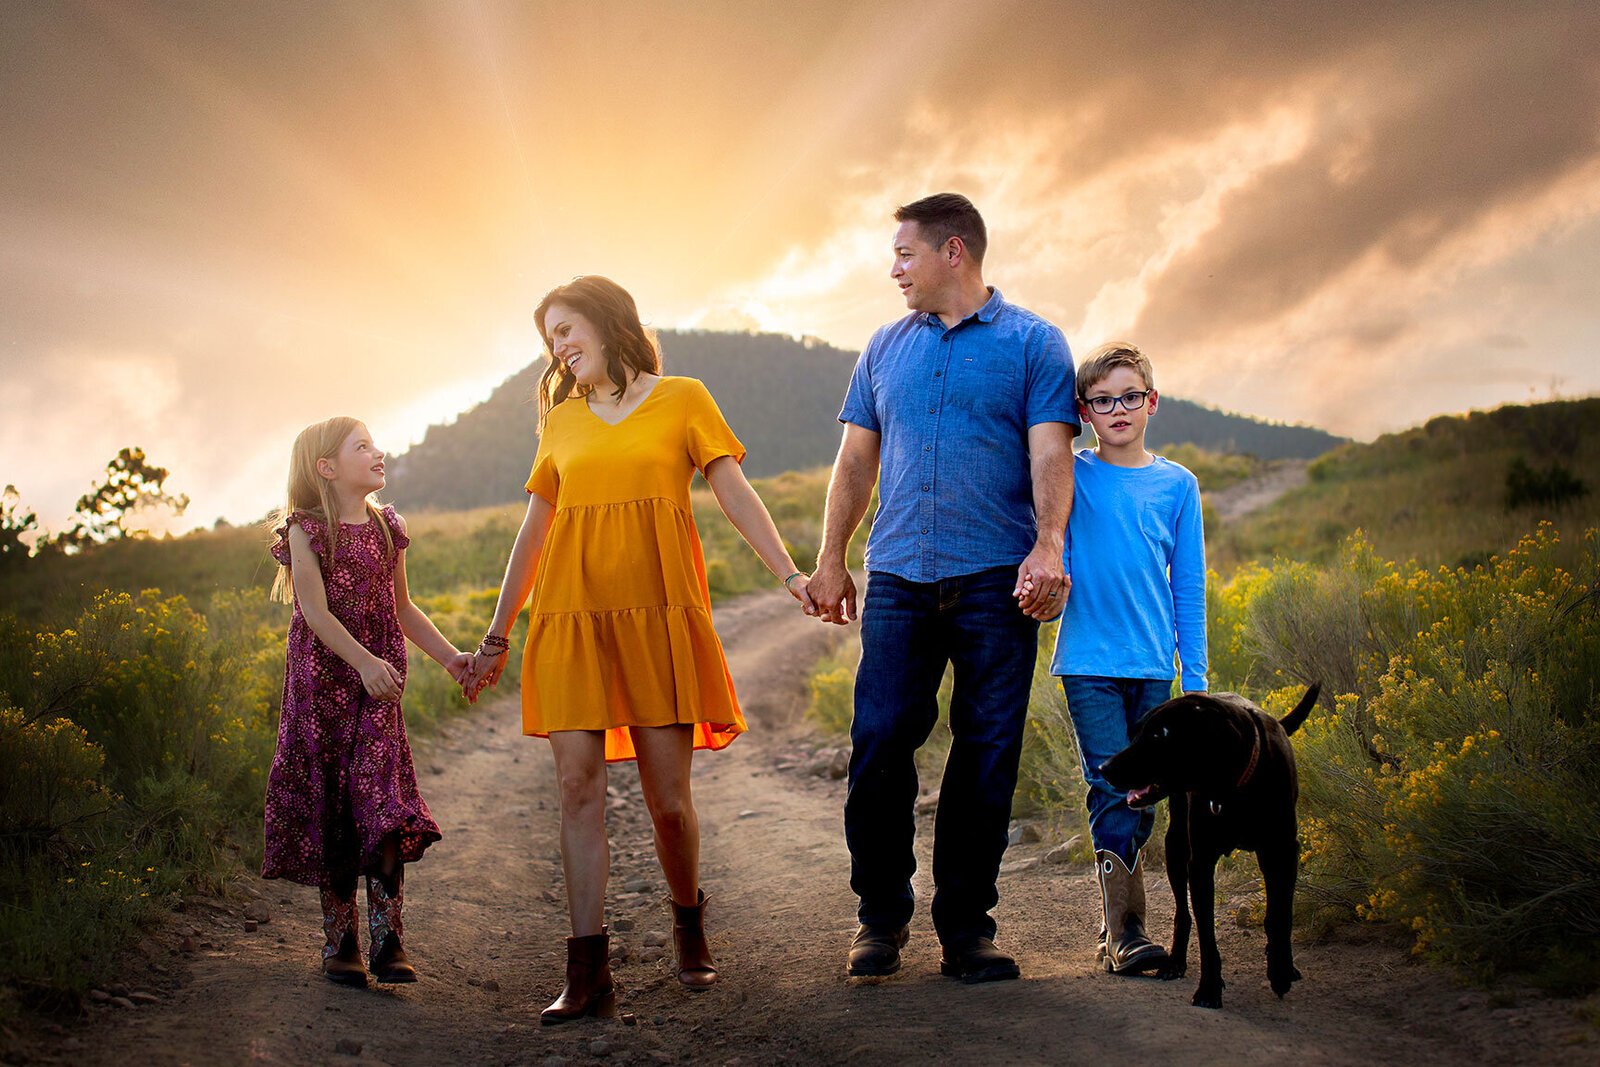 colorado-mountains-mountain-sunset-family-landscape-view-south-forks-Rio-Grande-Club-holding-hands-dog-connection-love